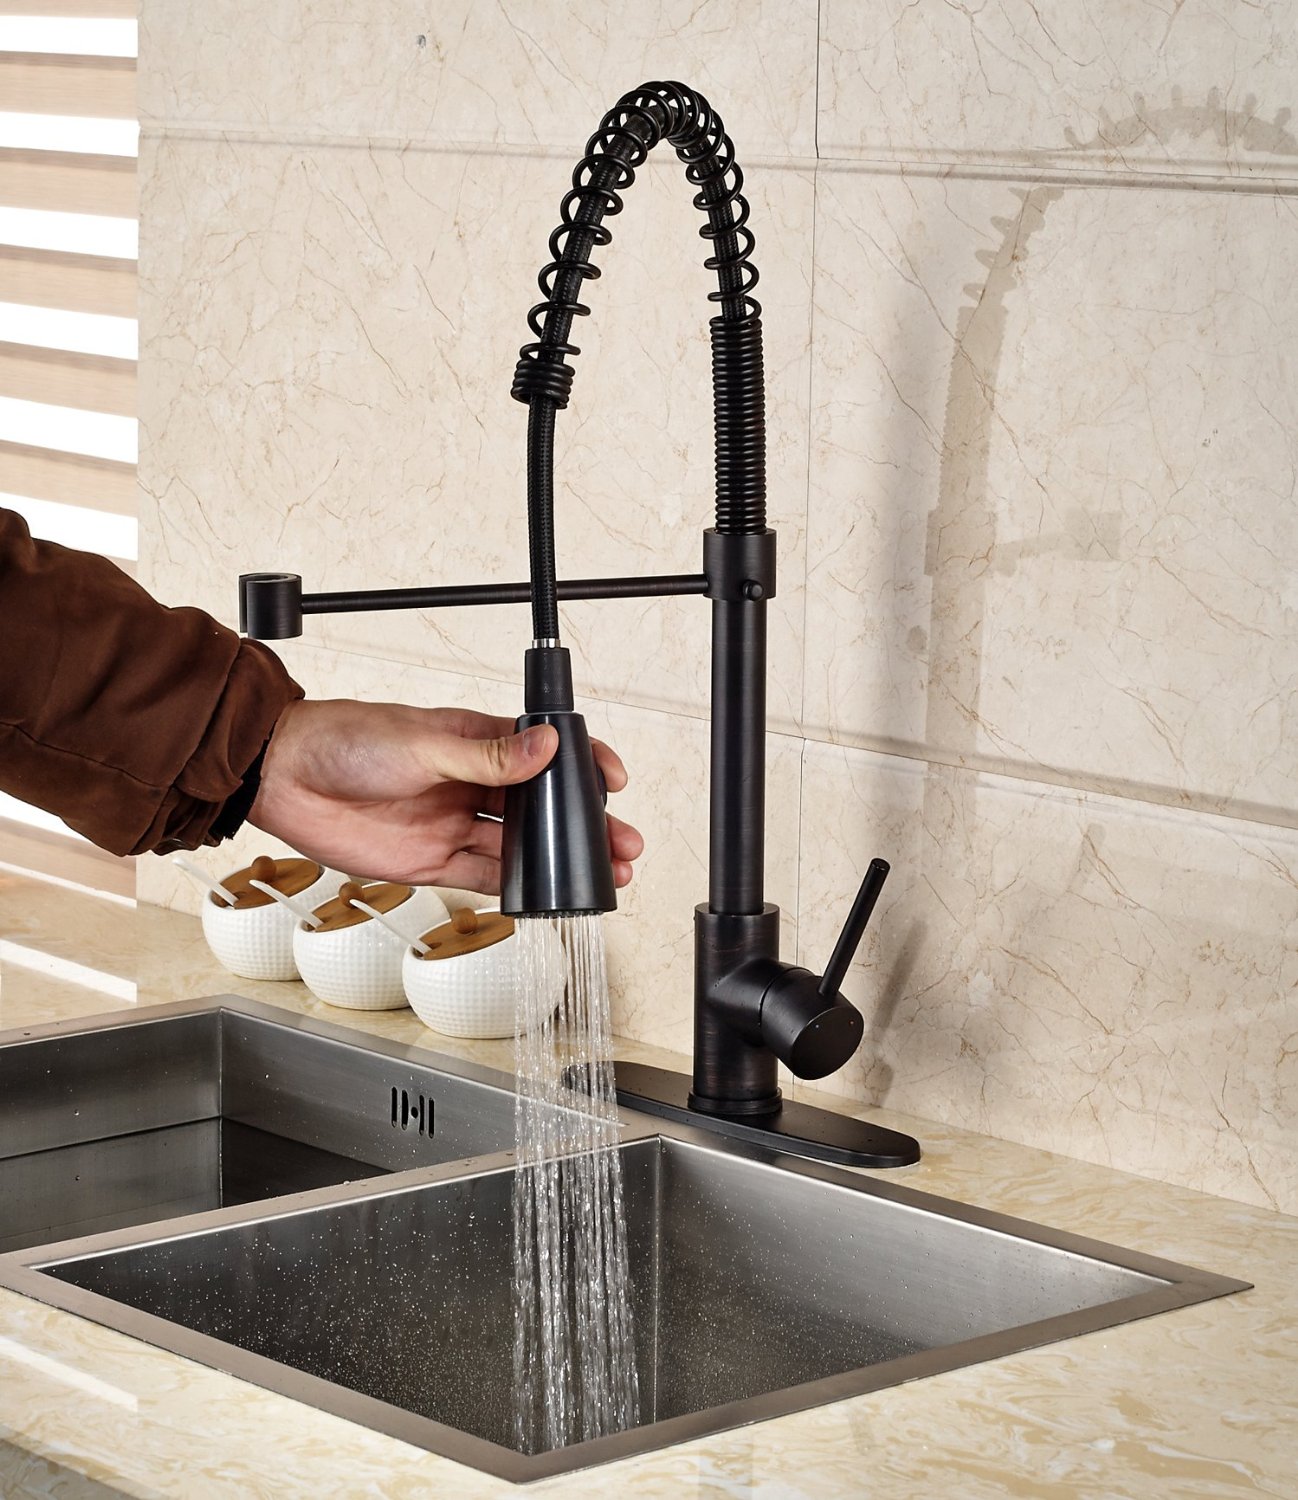 Tindouf Oil Rubbed Bronze Kitchen Sink Faucet with Pull Down Sprayer